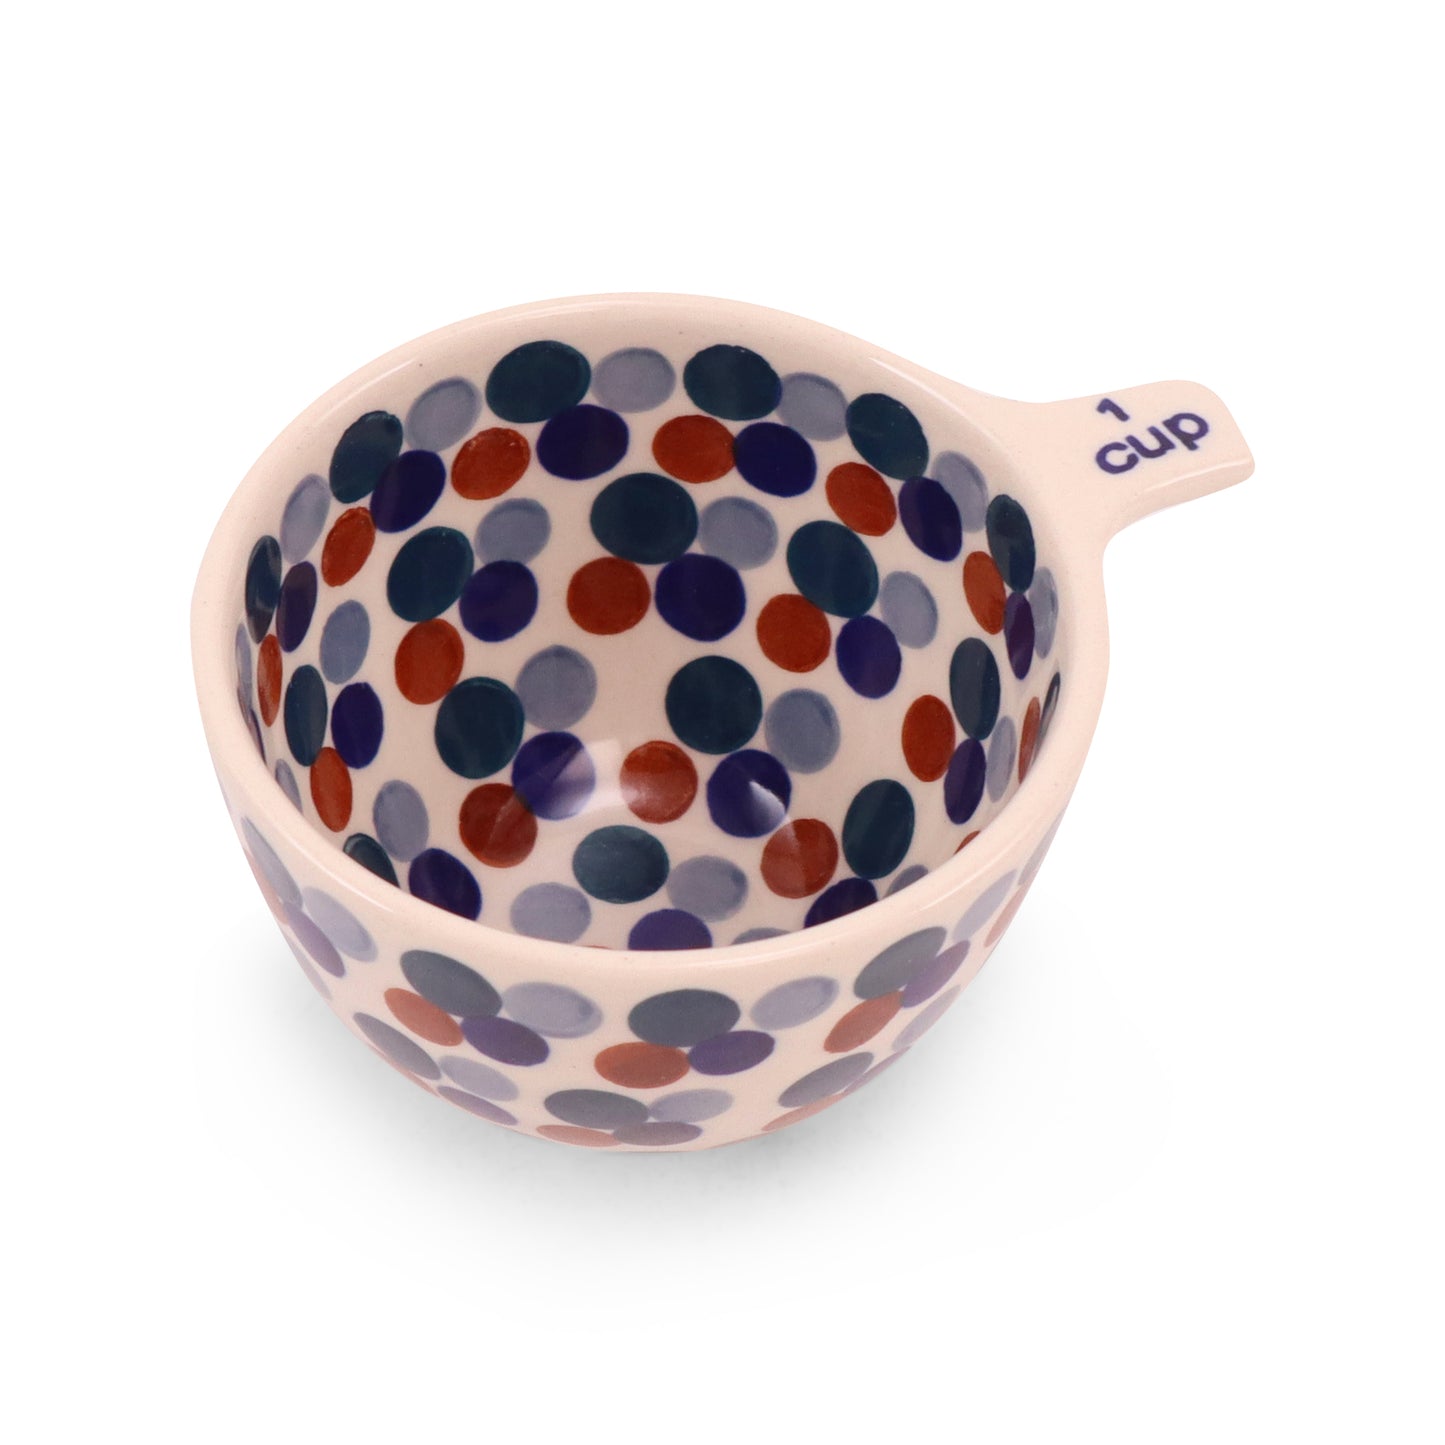 1 Cup Measuring Cup. Pattern: Galaxy